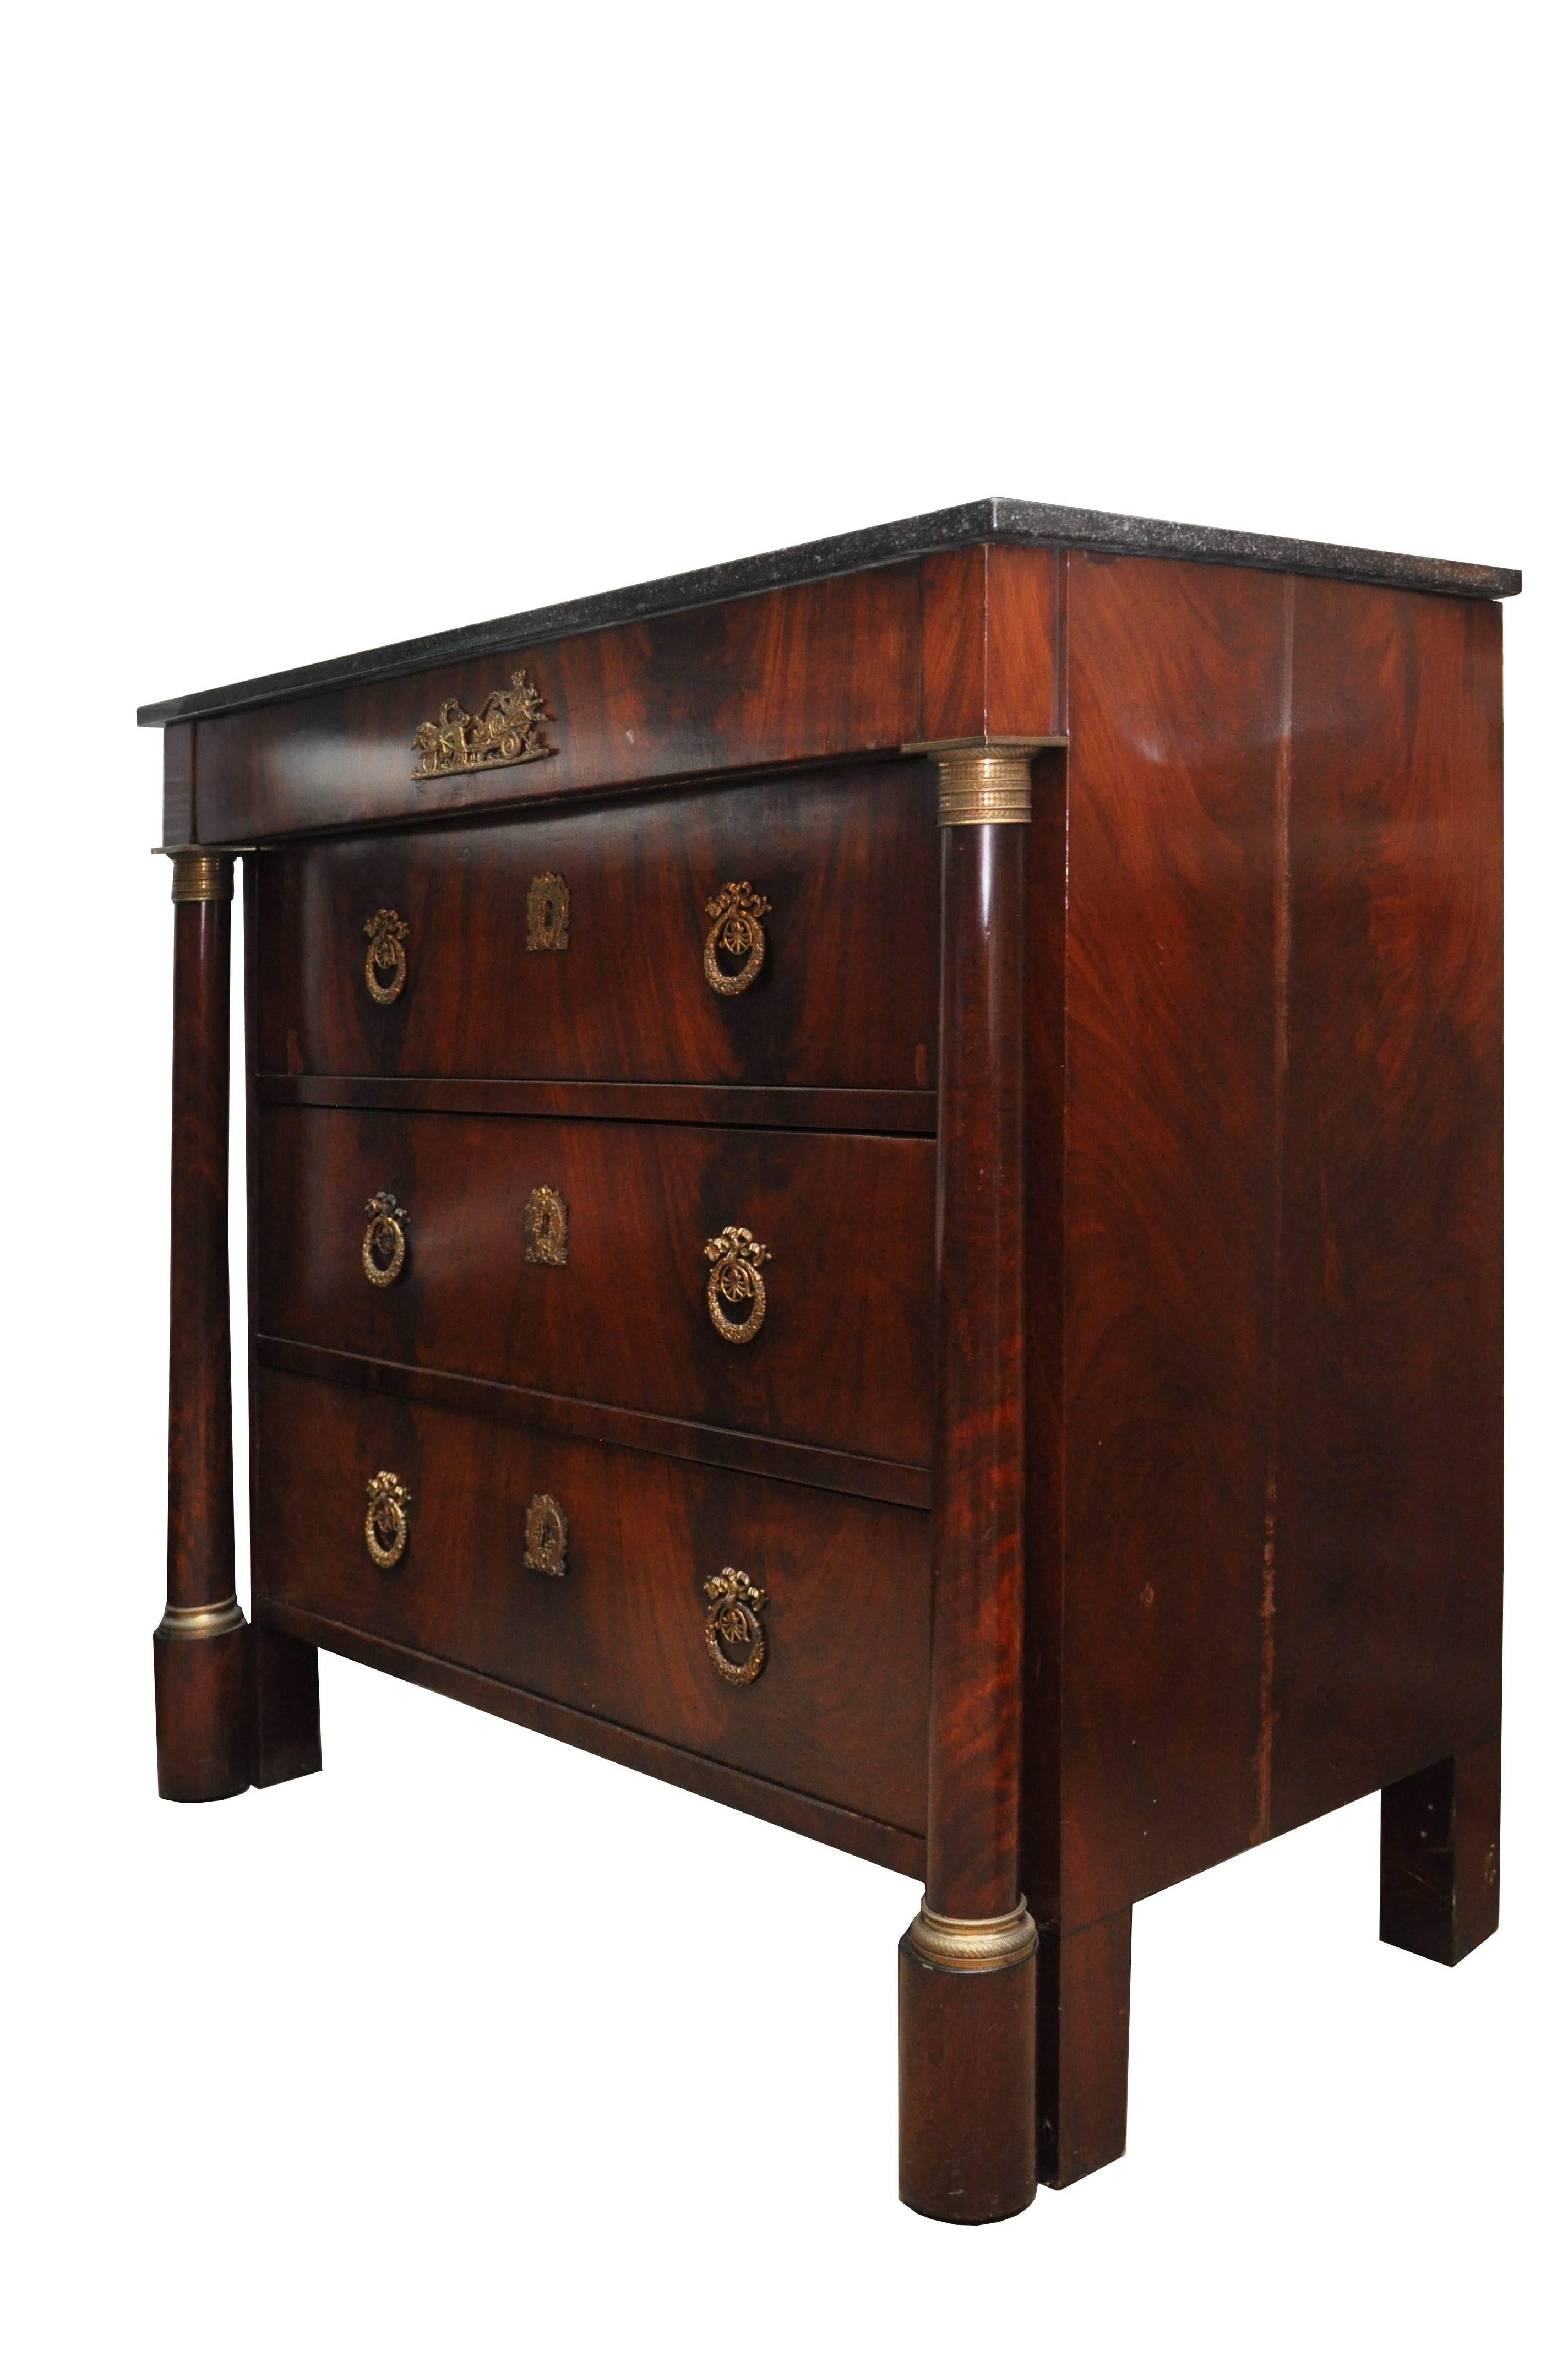 French Early 19th Century Empire Period Mahogany Chest For Sale 1